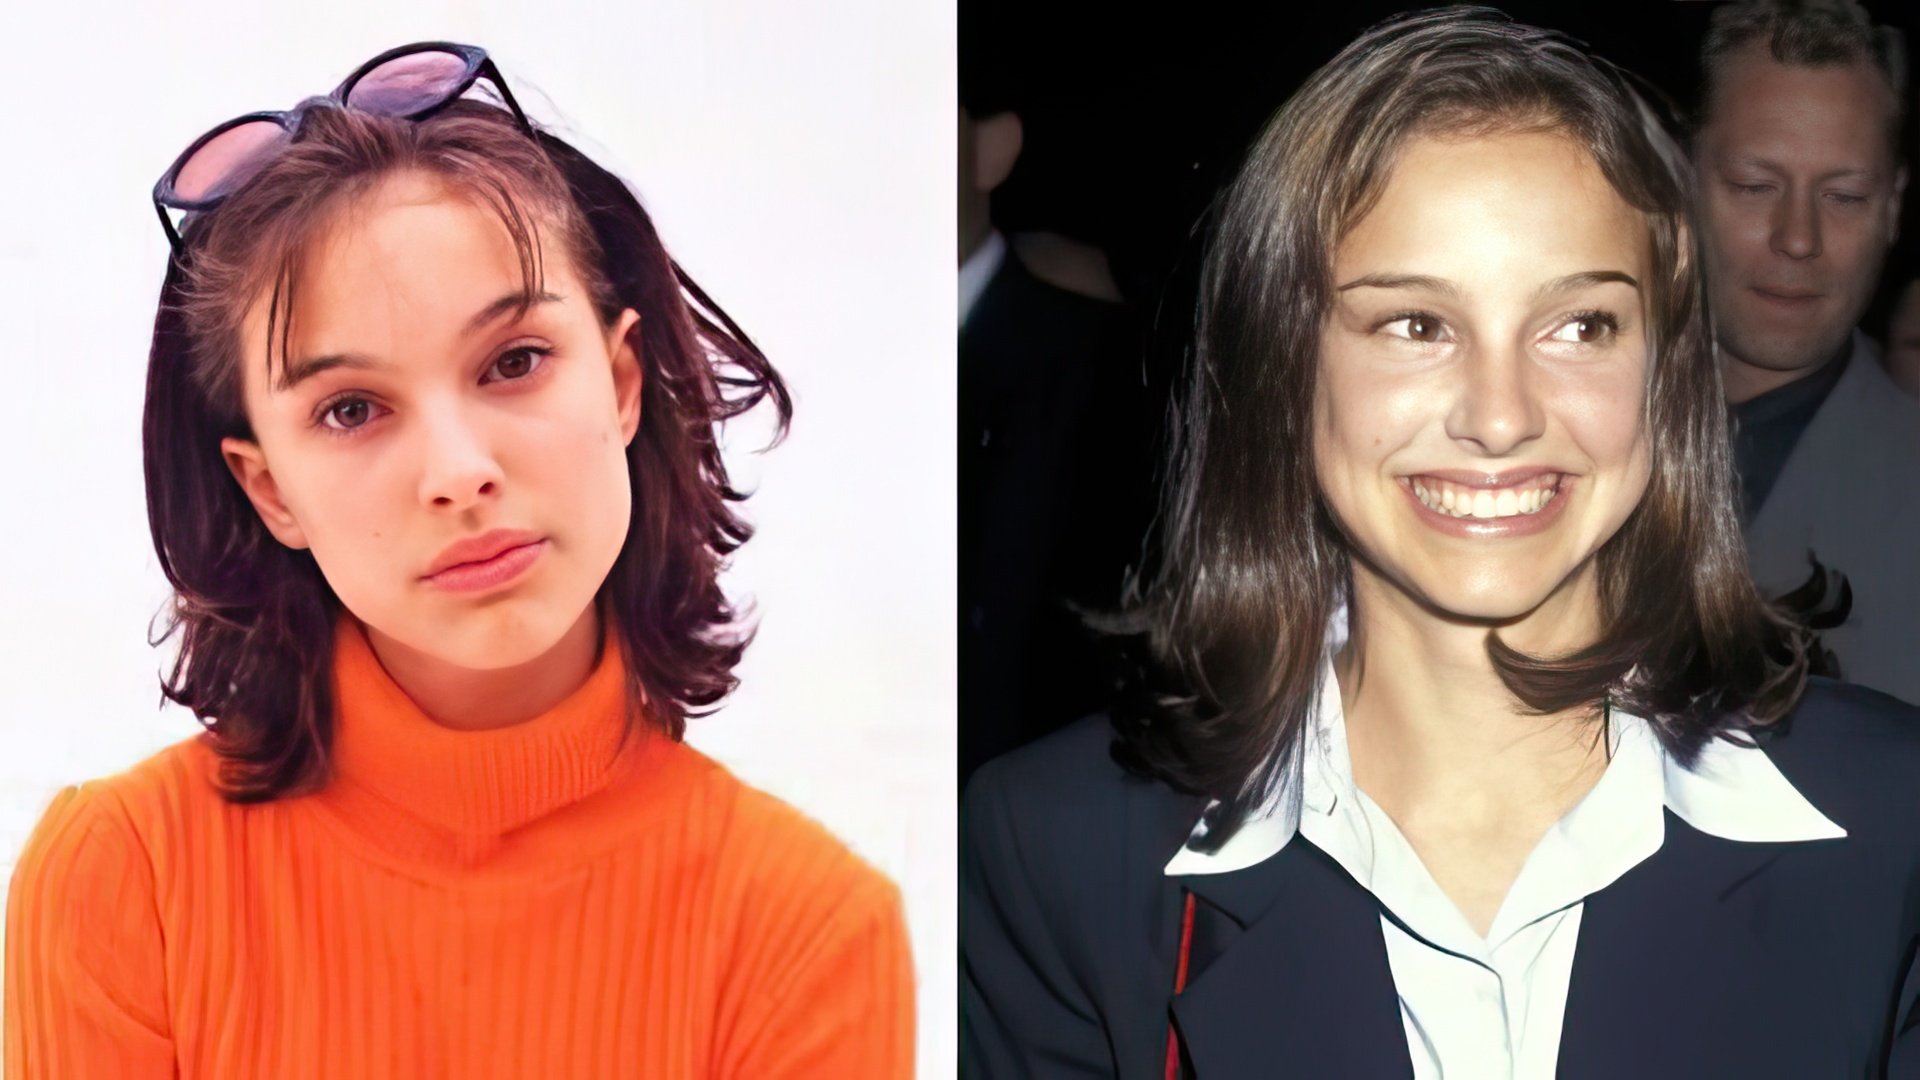 1995: gifted schoolgirl and a very promising actress